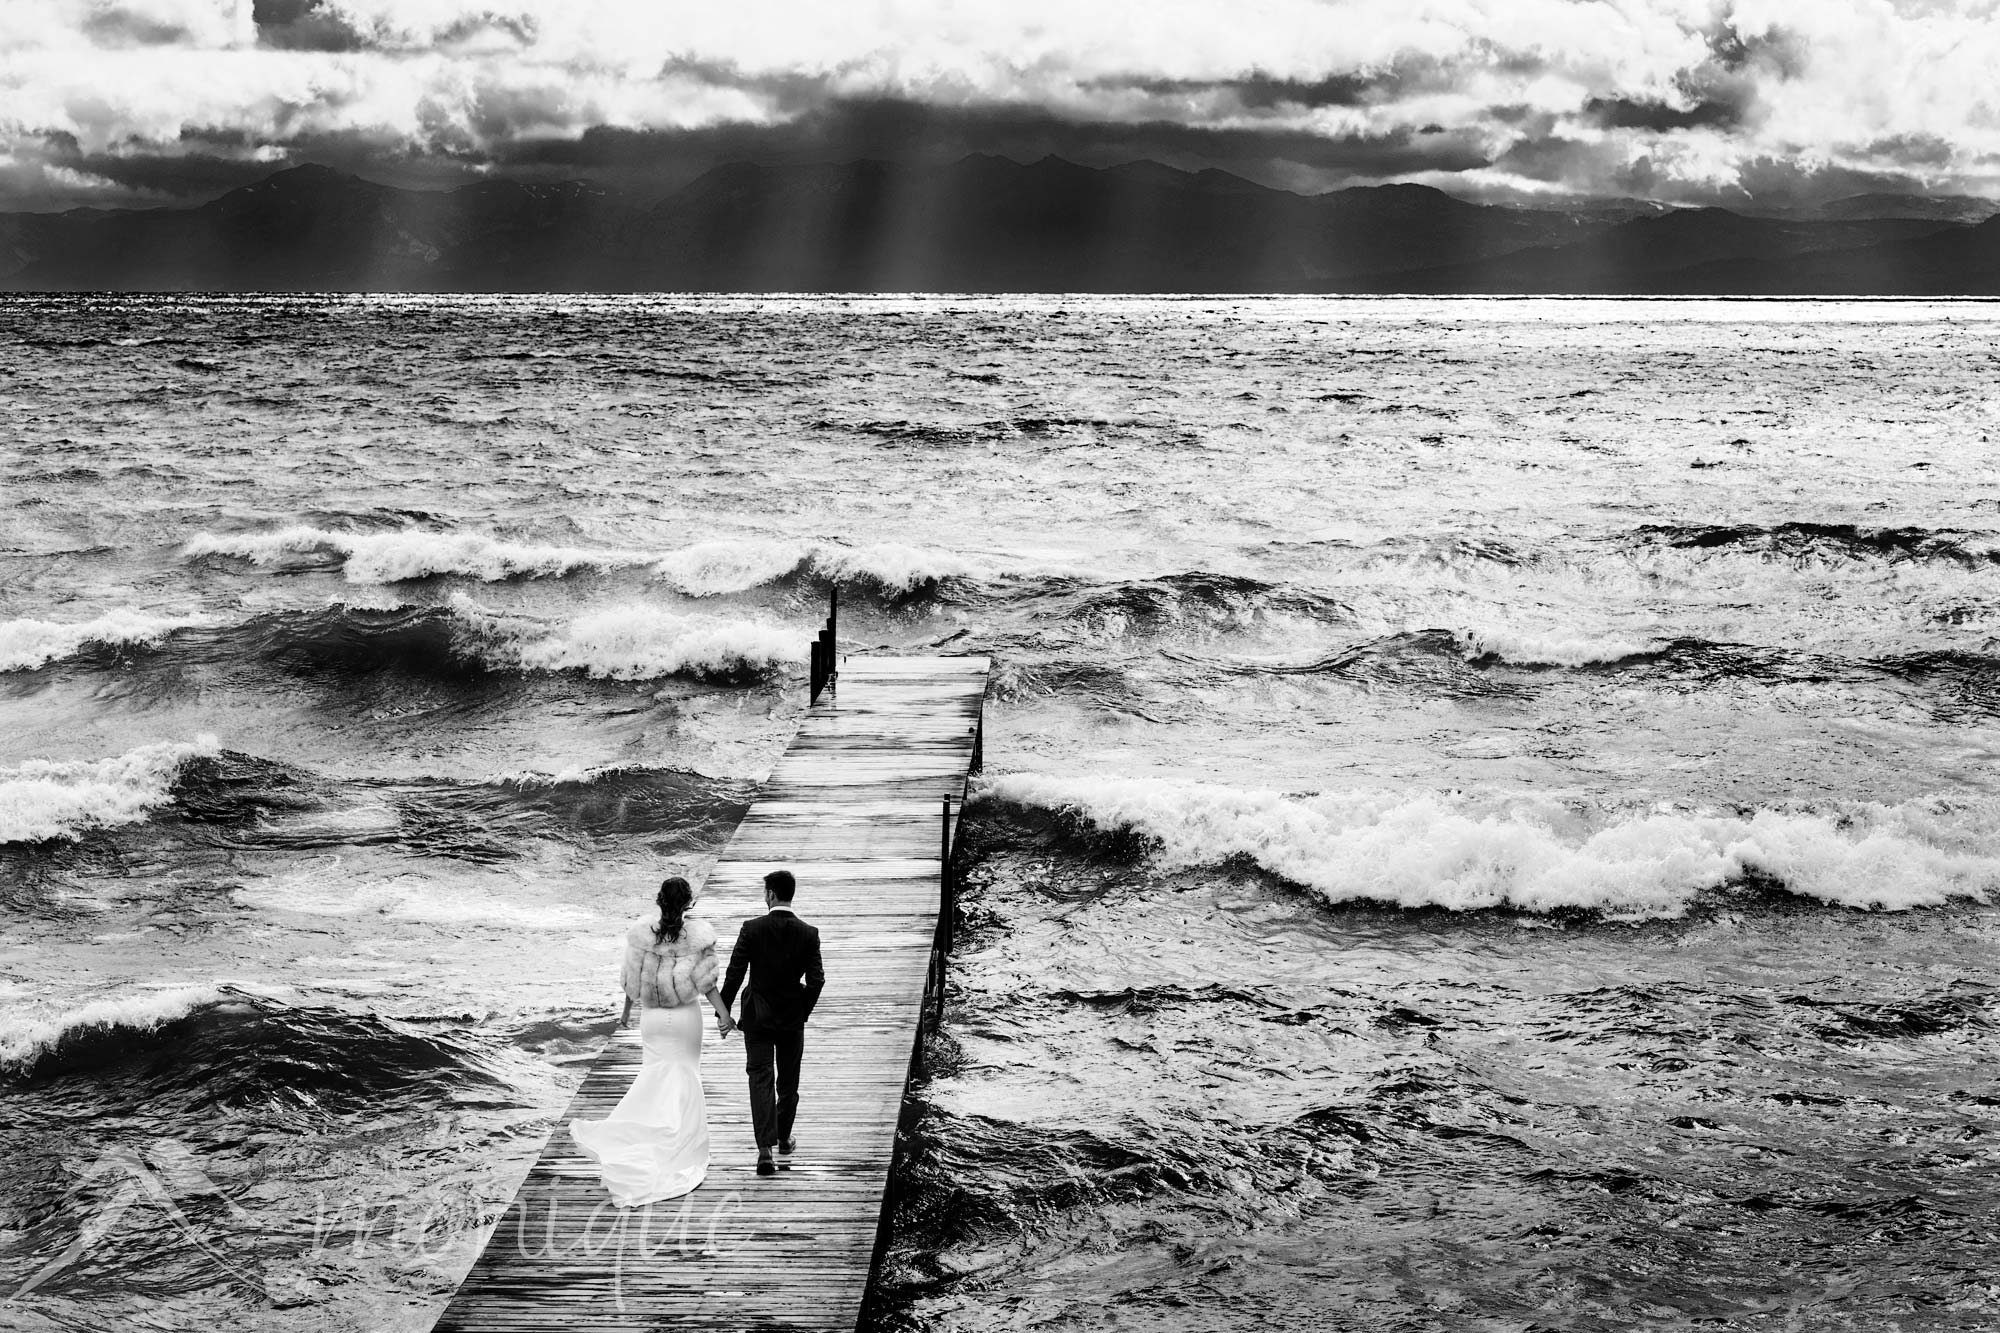 Lake Tahoe wedding photography with the bride and groom on a pier with waves crashing